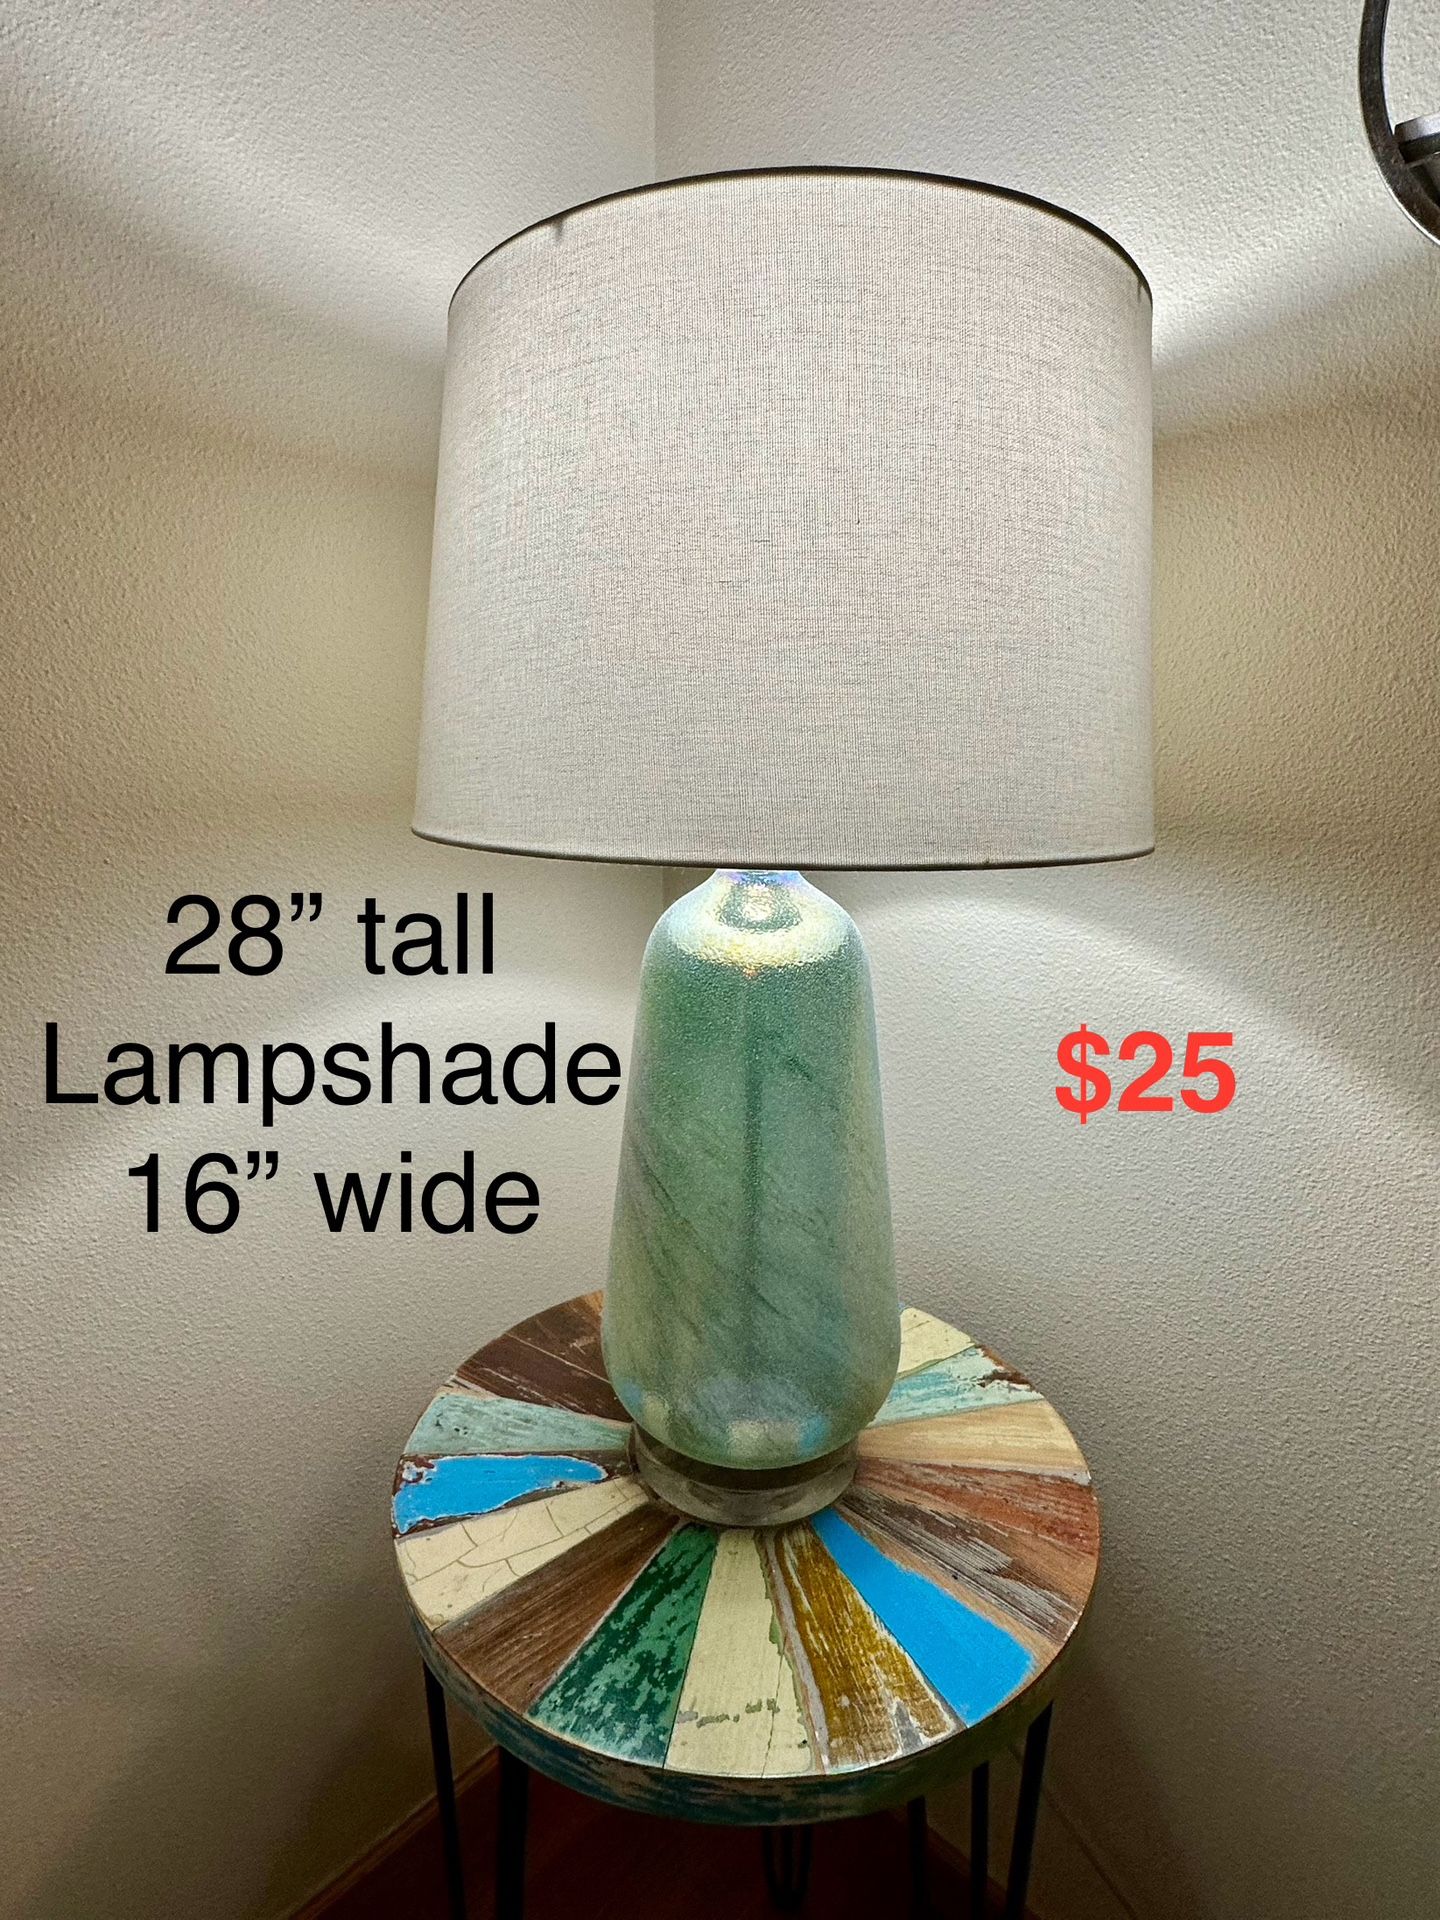 Home Decorations - Lamp, Picture, Wall Candle Holders, Metal Wall Art 